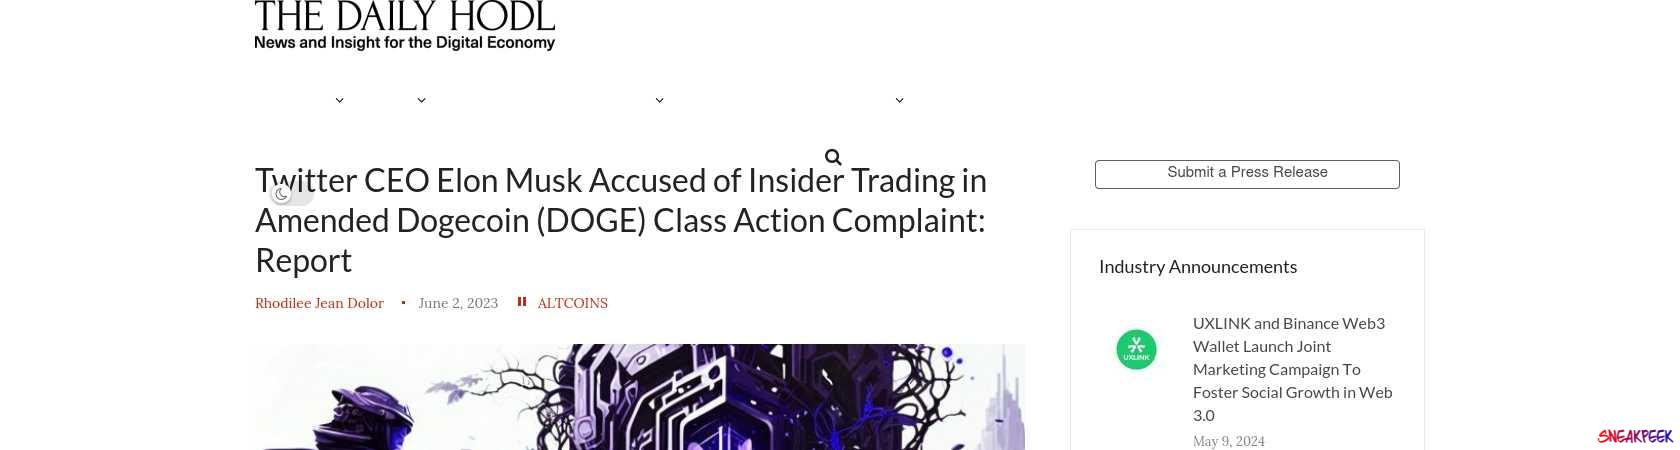 Read the full Article:  ⭲ Twitter CEO Elon Musk Accused of Insider Trading in Amended Dogecoin (DOGE) Class Action Complaint: Report